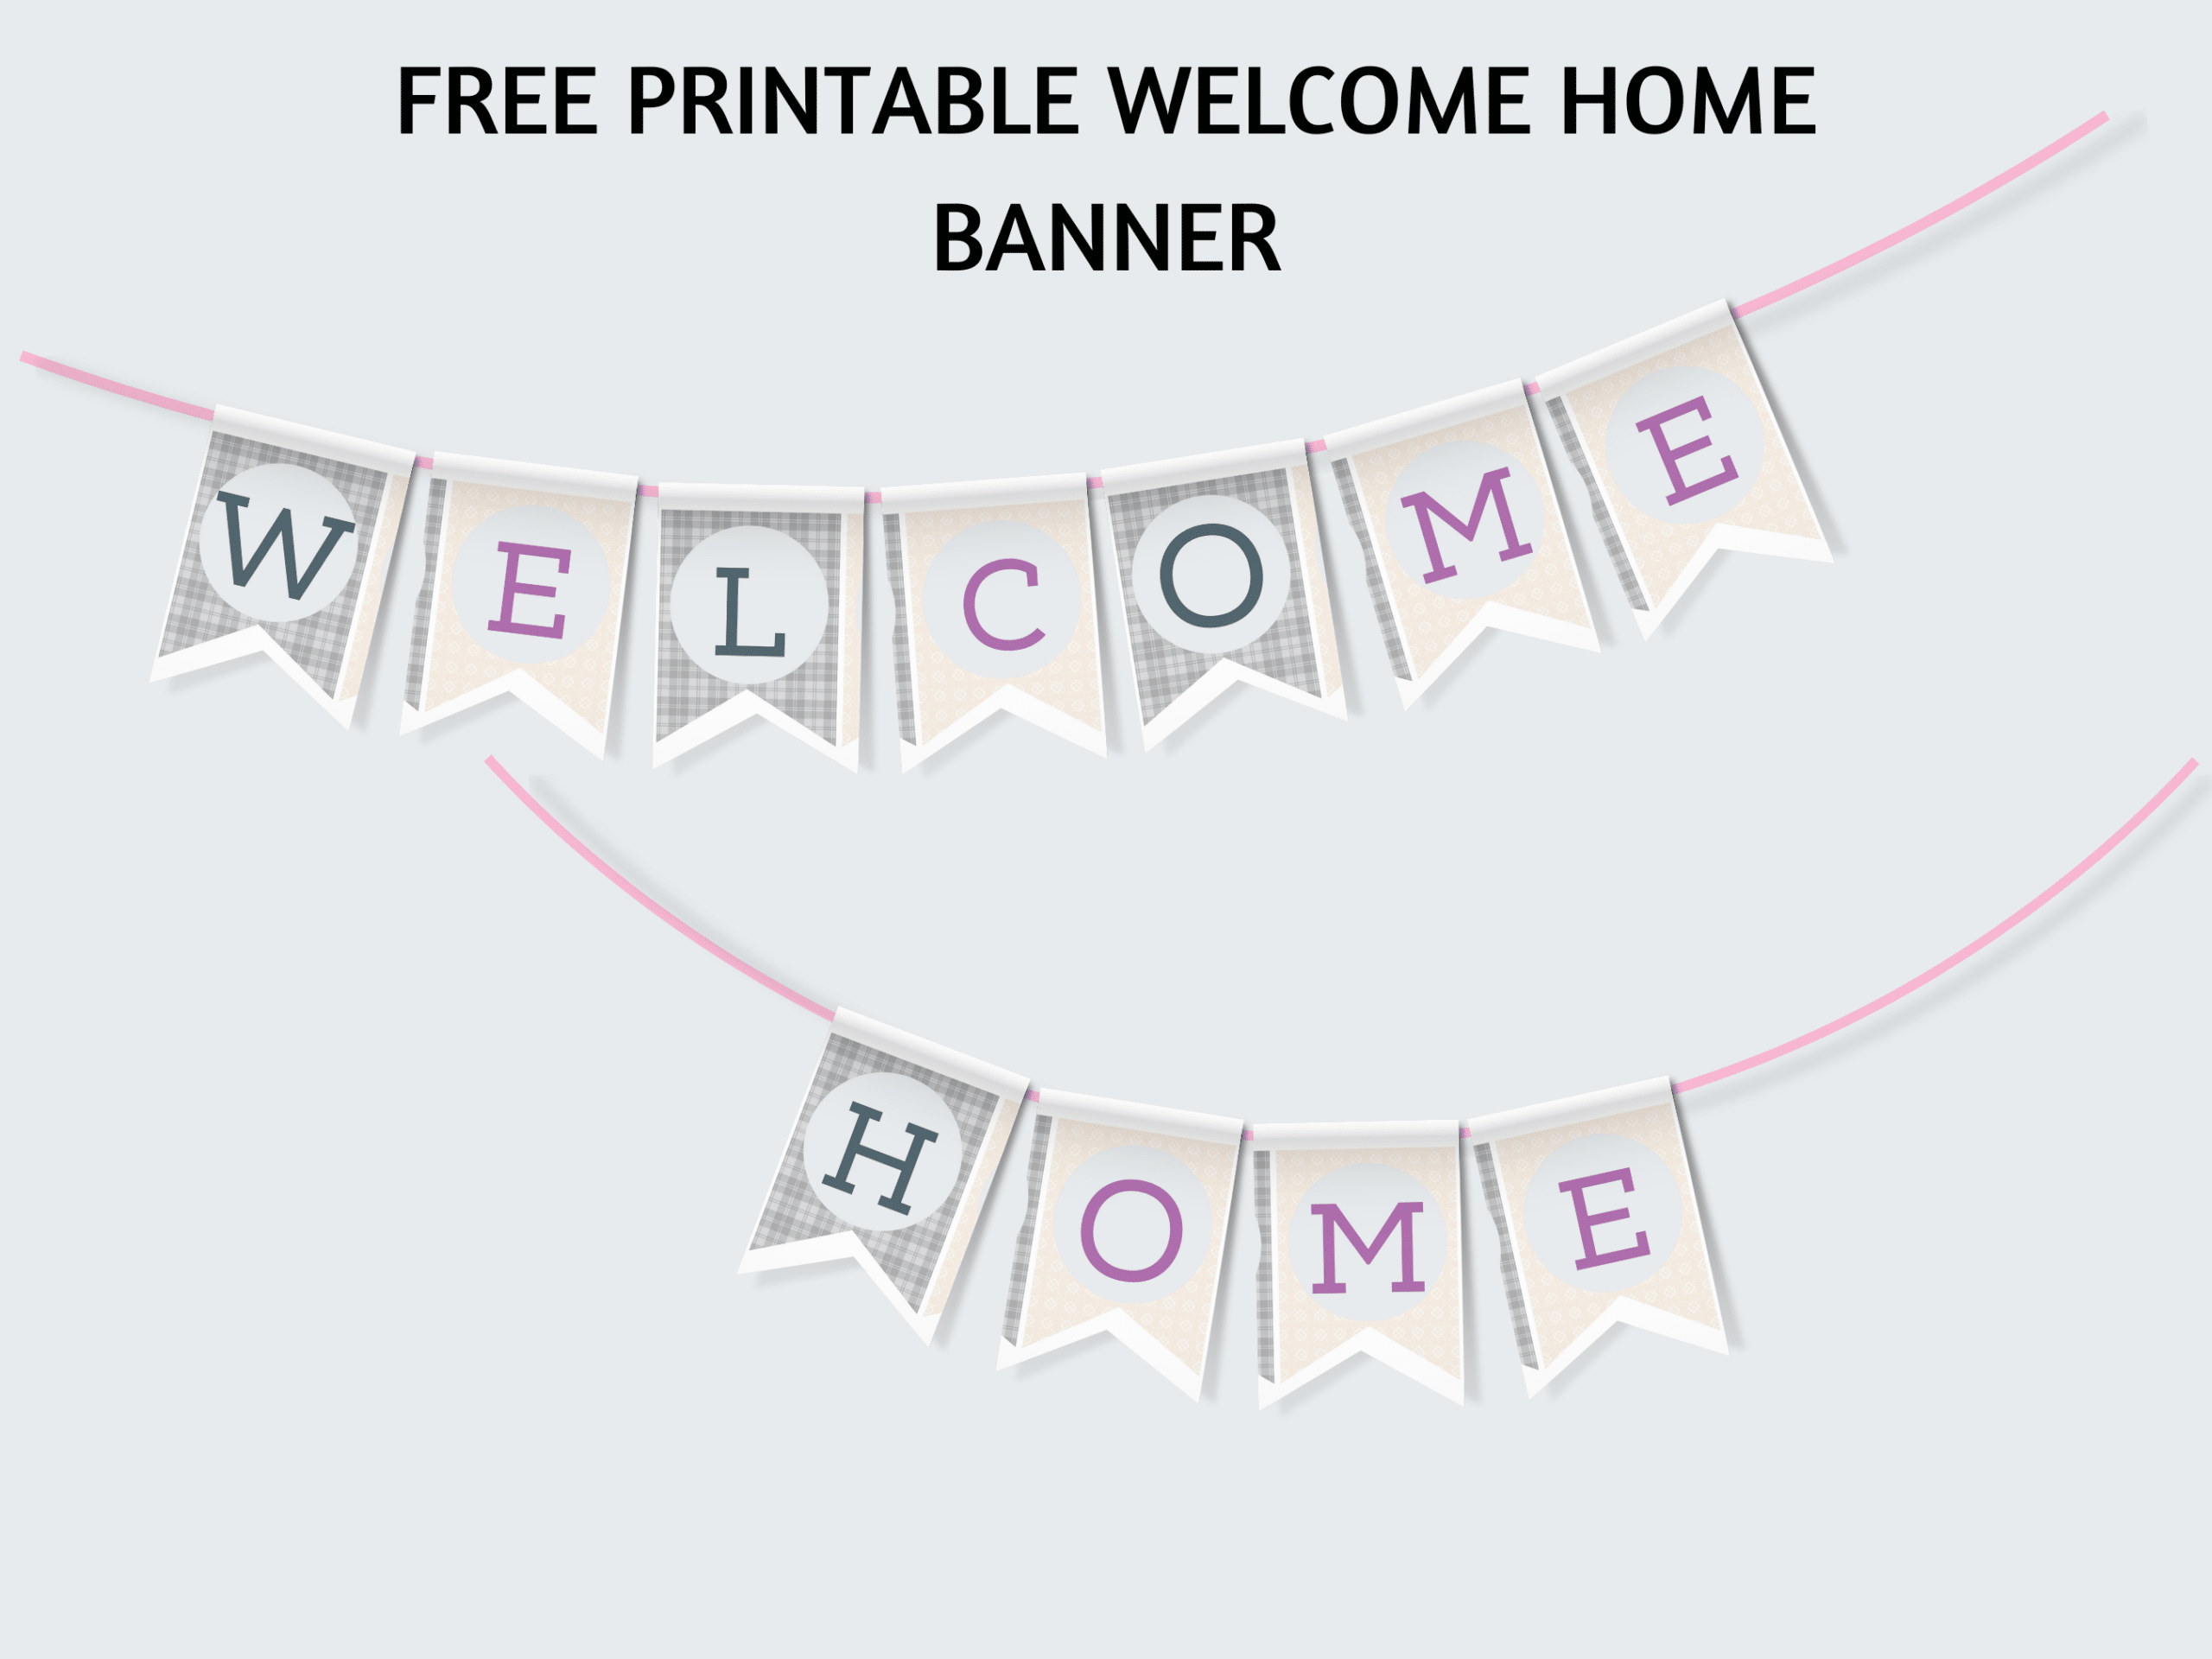 Welcome Home Banner Printable (Free Banner)